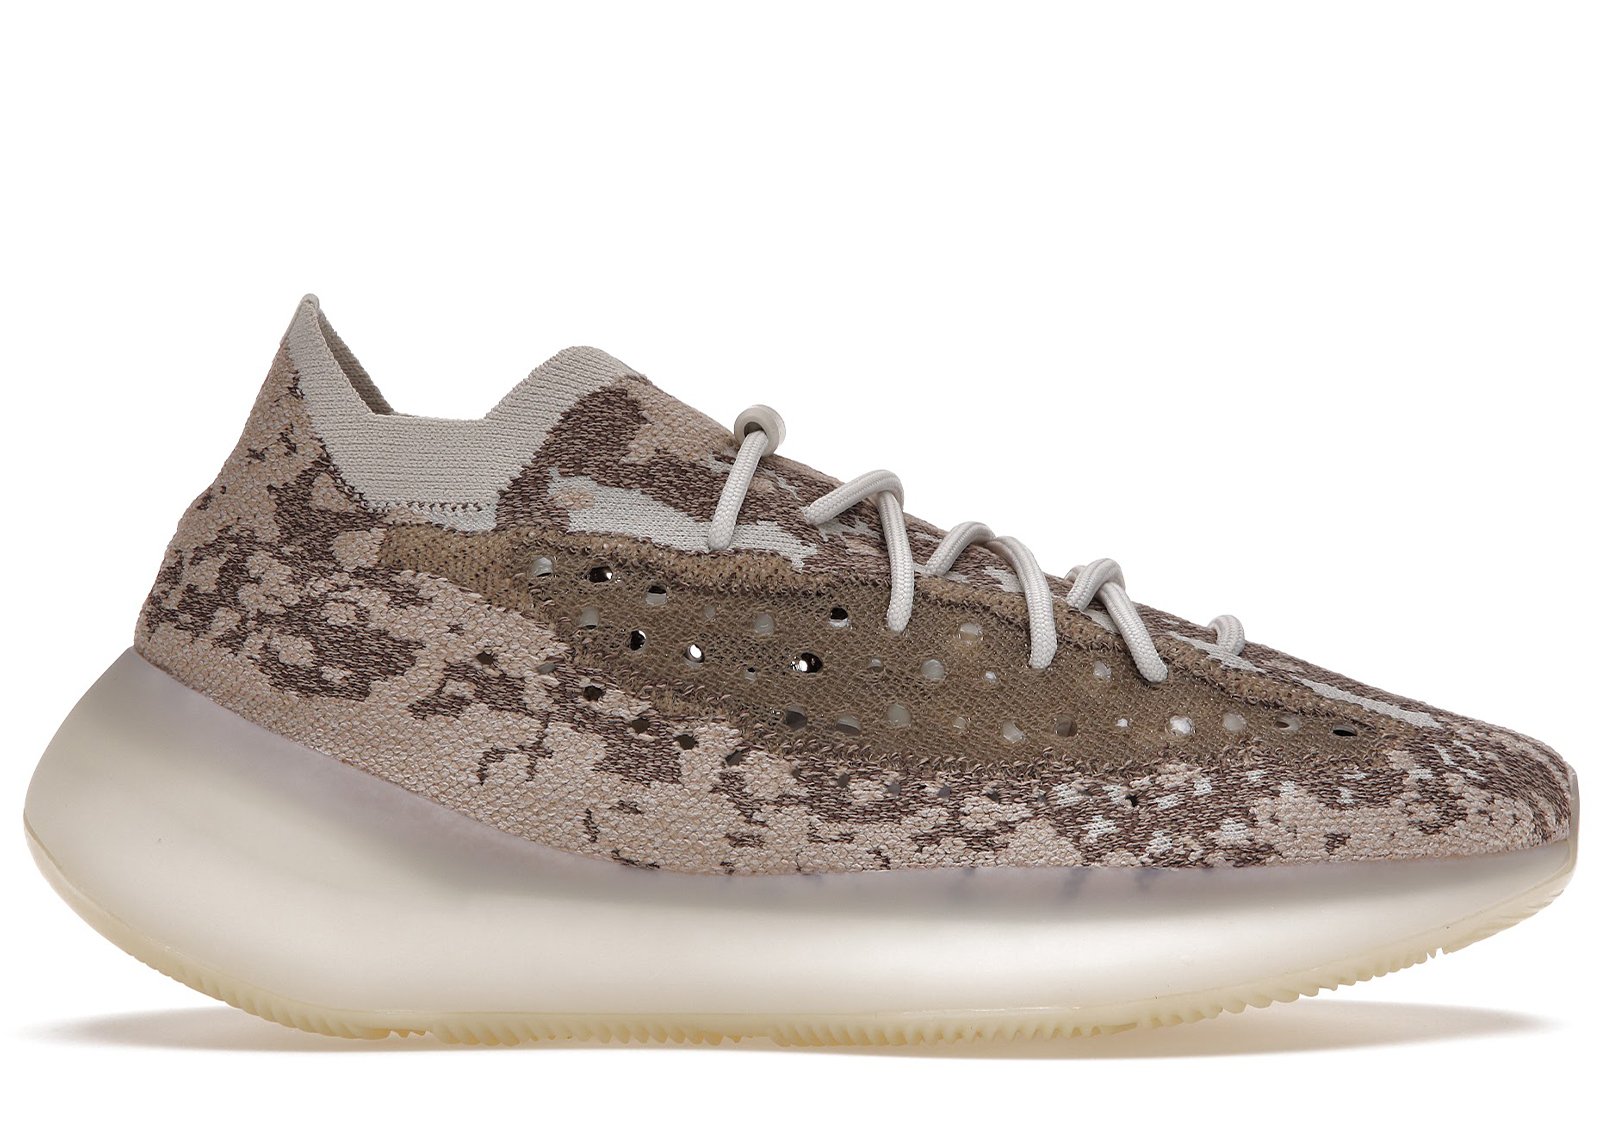 adidas Yeezy Boost 380 Pyrite sneakers